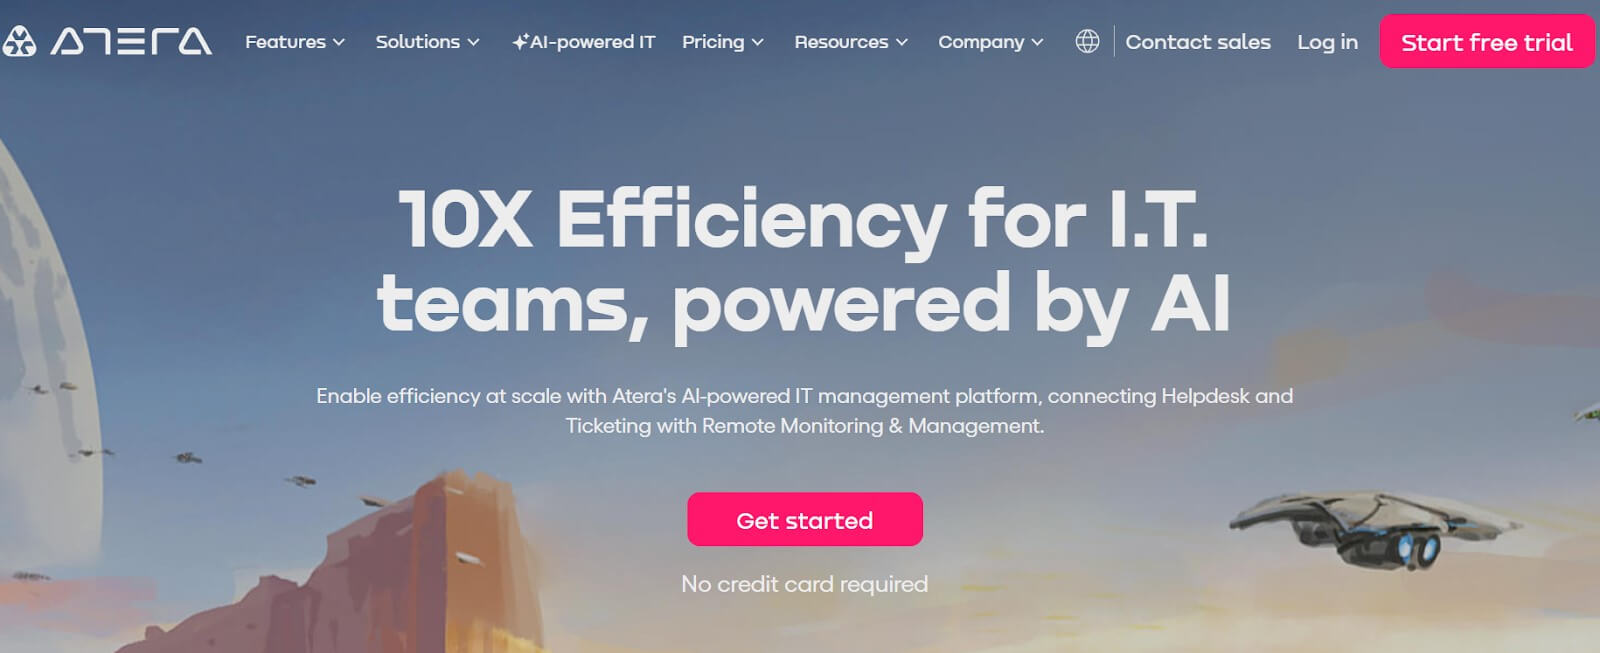 Homepage of Atera with headline 10X Efficiency for I.T. teams, powered by AI, featuring a sci-fi themed background.